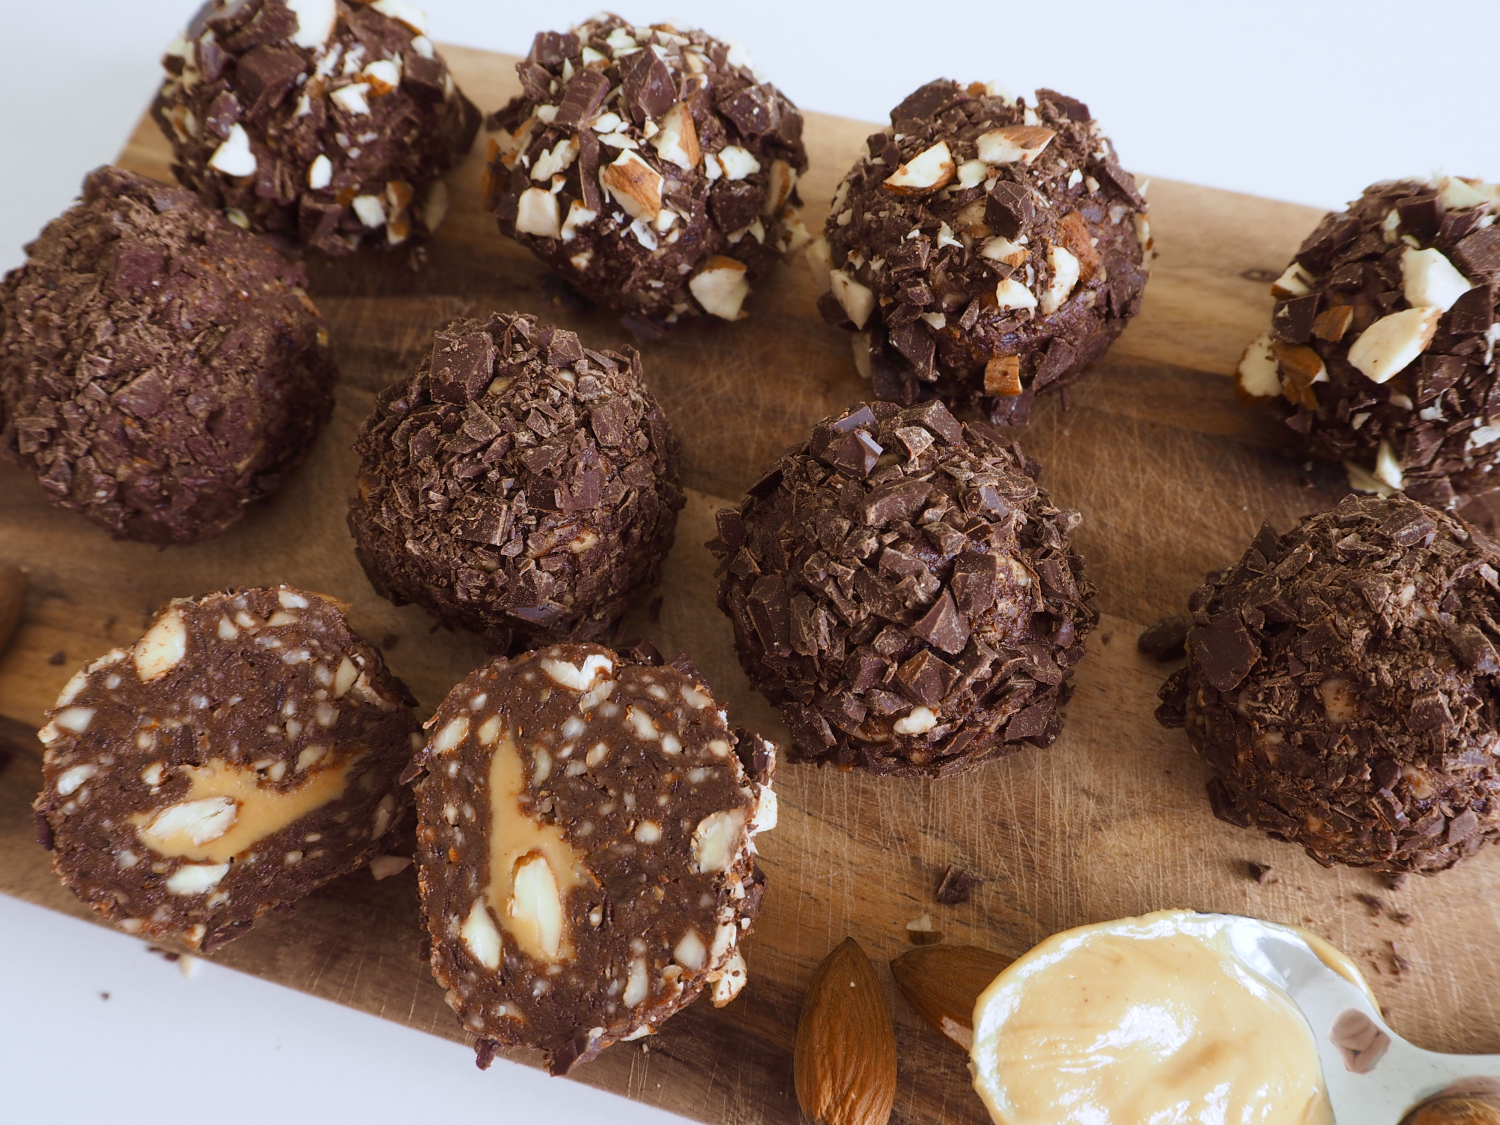 Chocolate bliss balls with a peanut butter and almond core